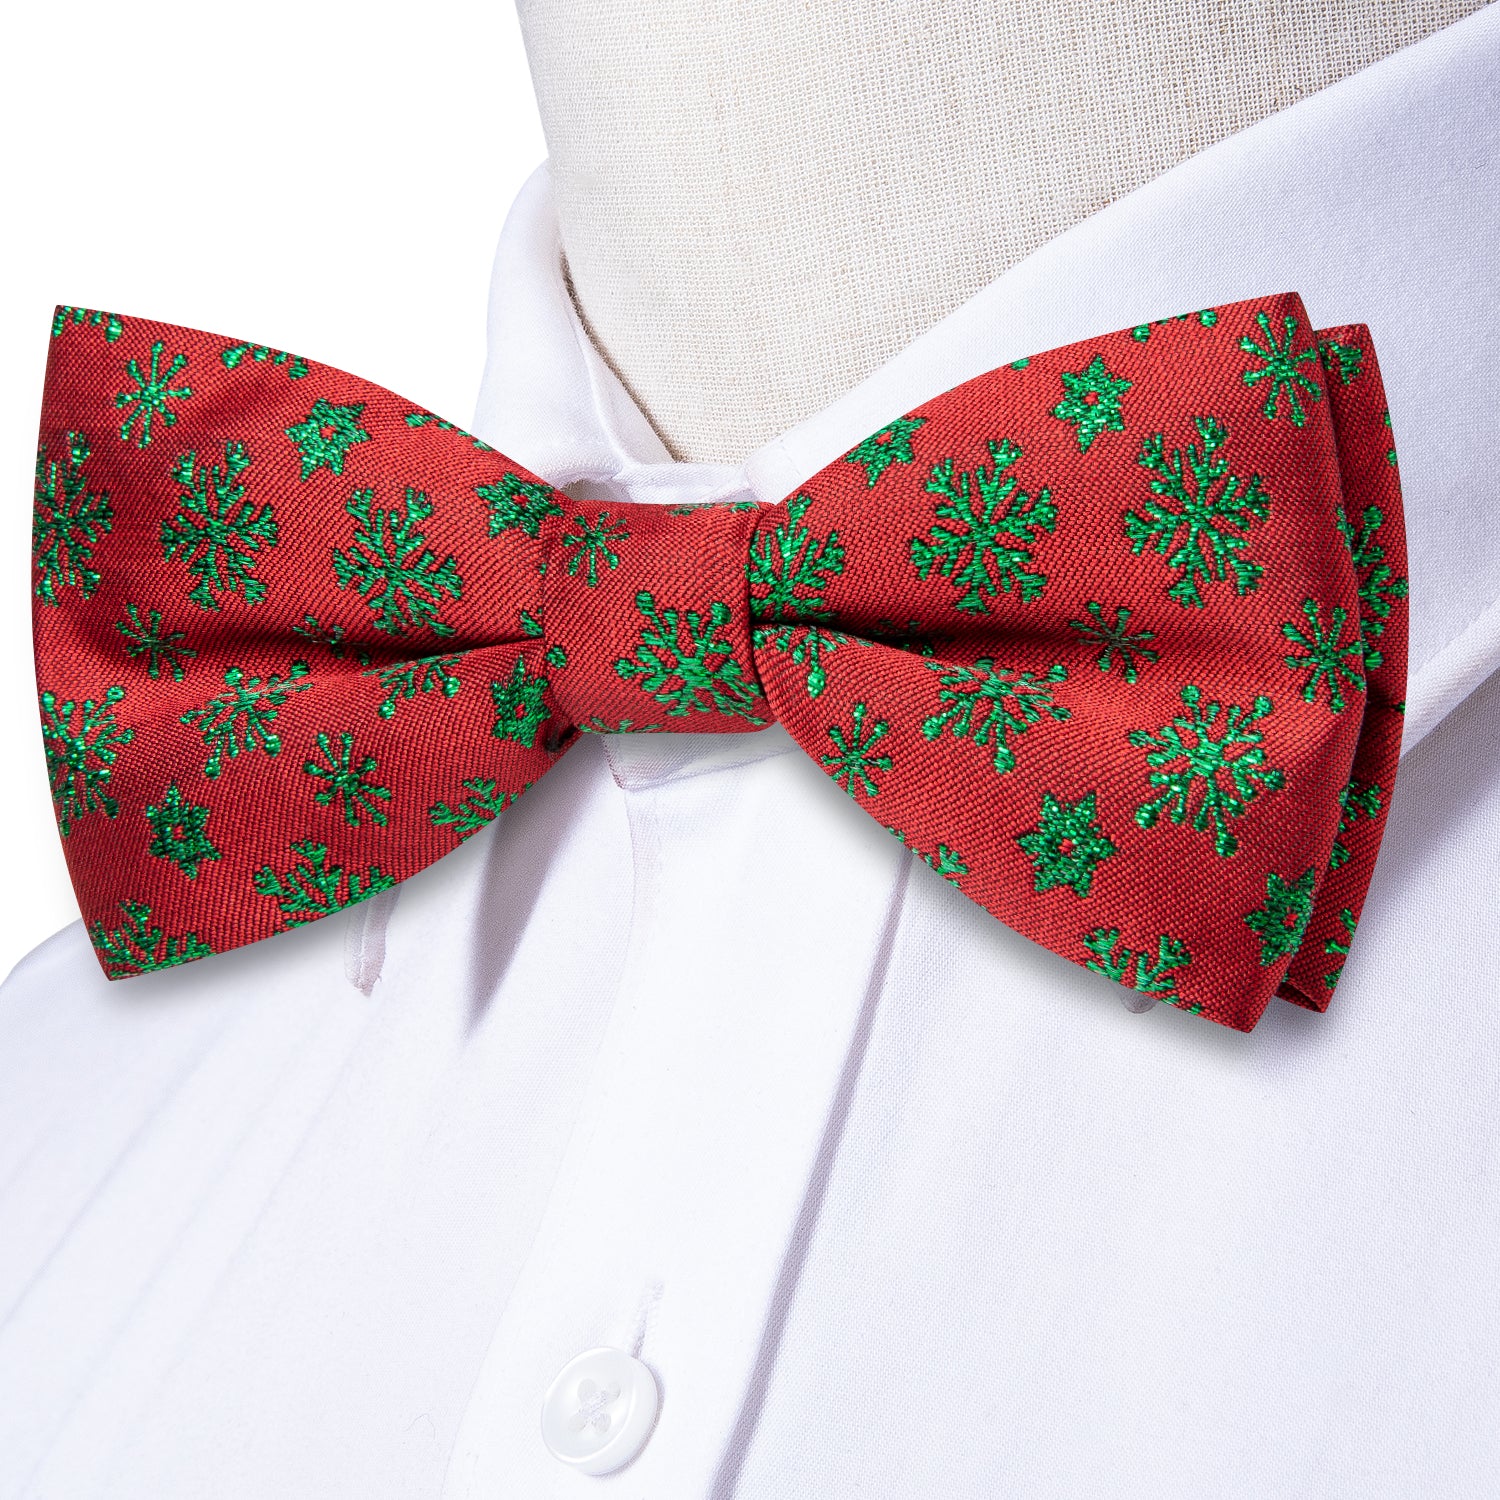 Christmas Red Green Snowflakes Pre-tied Bow Tie Hanky Cufflinks Set